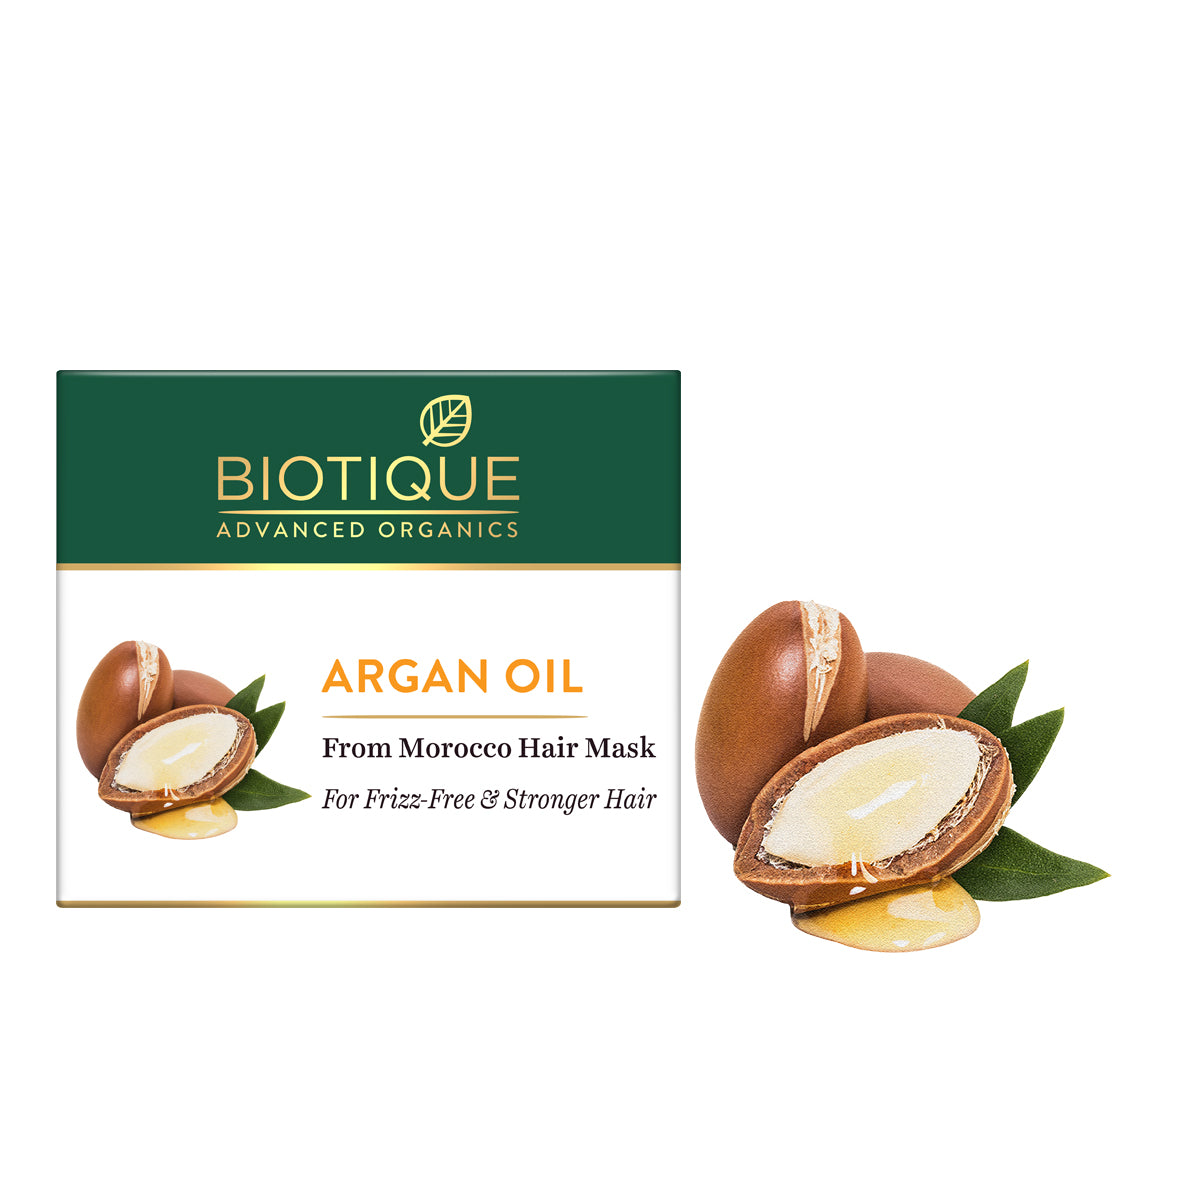 ARGAN OIL FROM MOROCCO HAIR MASK 175GM